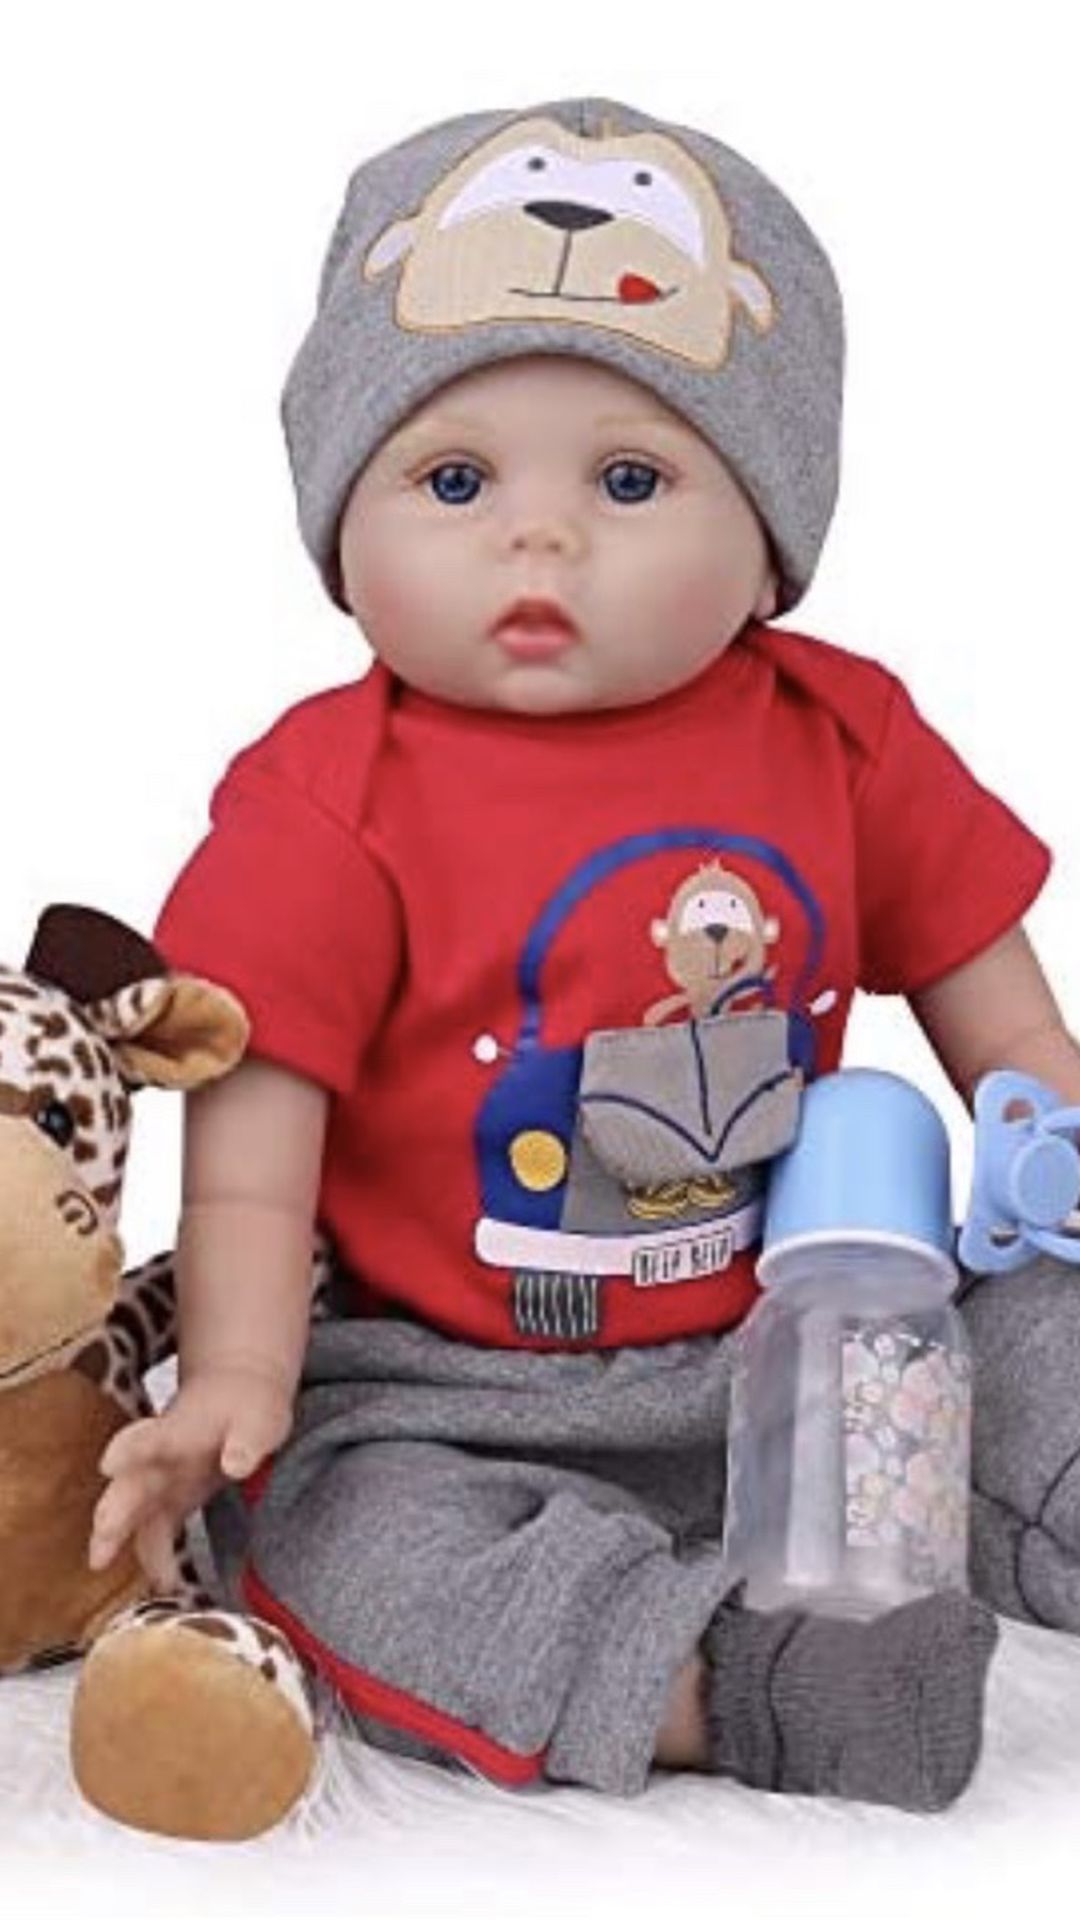 Reborn Baby Dolls 22 inch Realistic Baby Boy Doll Lifelike Weighted with Giraffe Gift Set Accessories